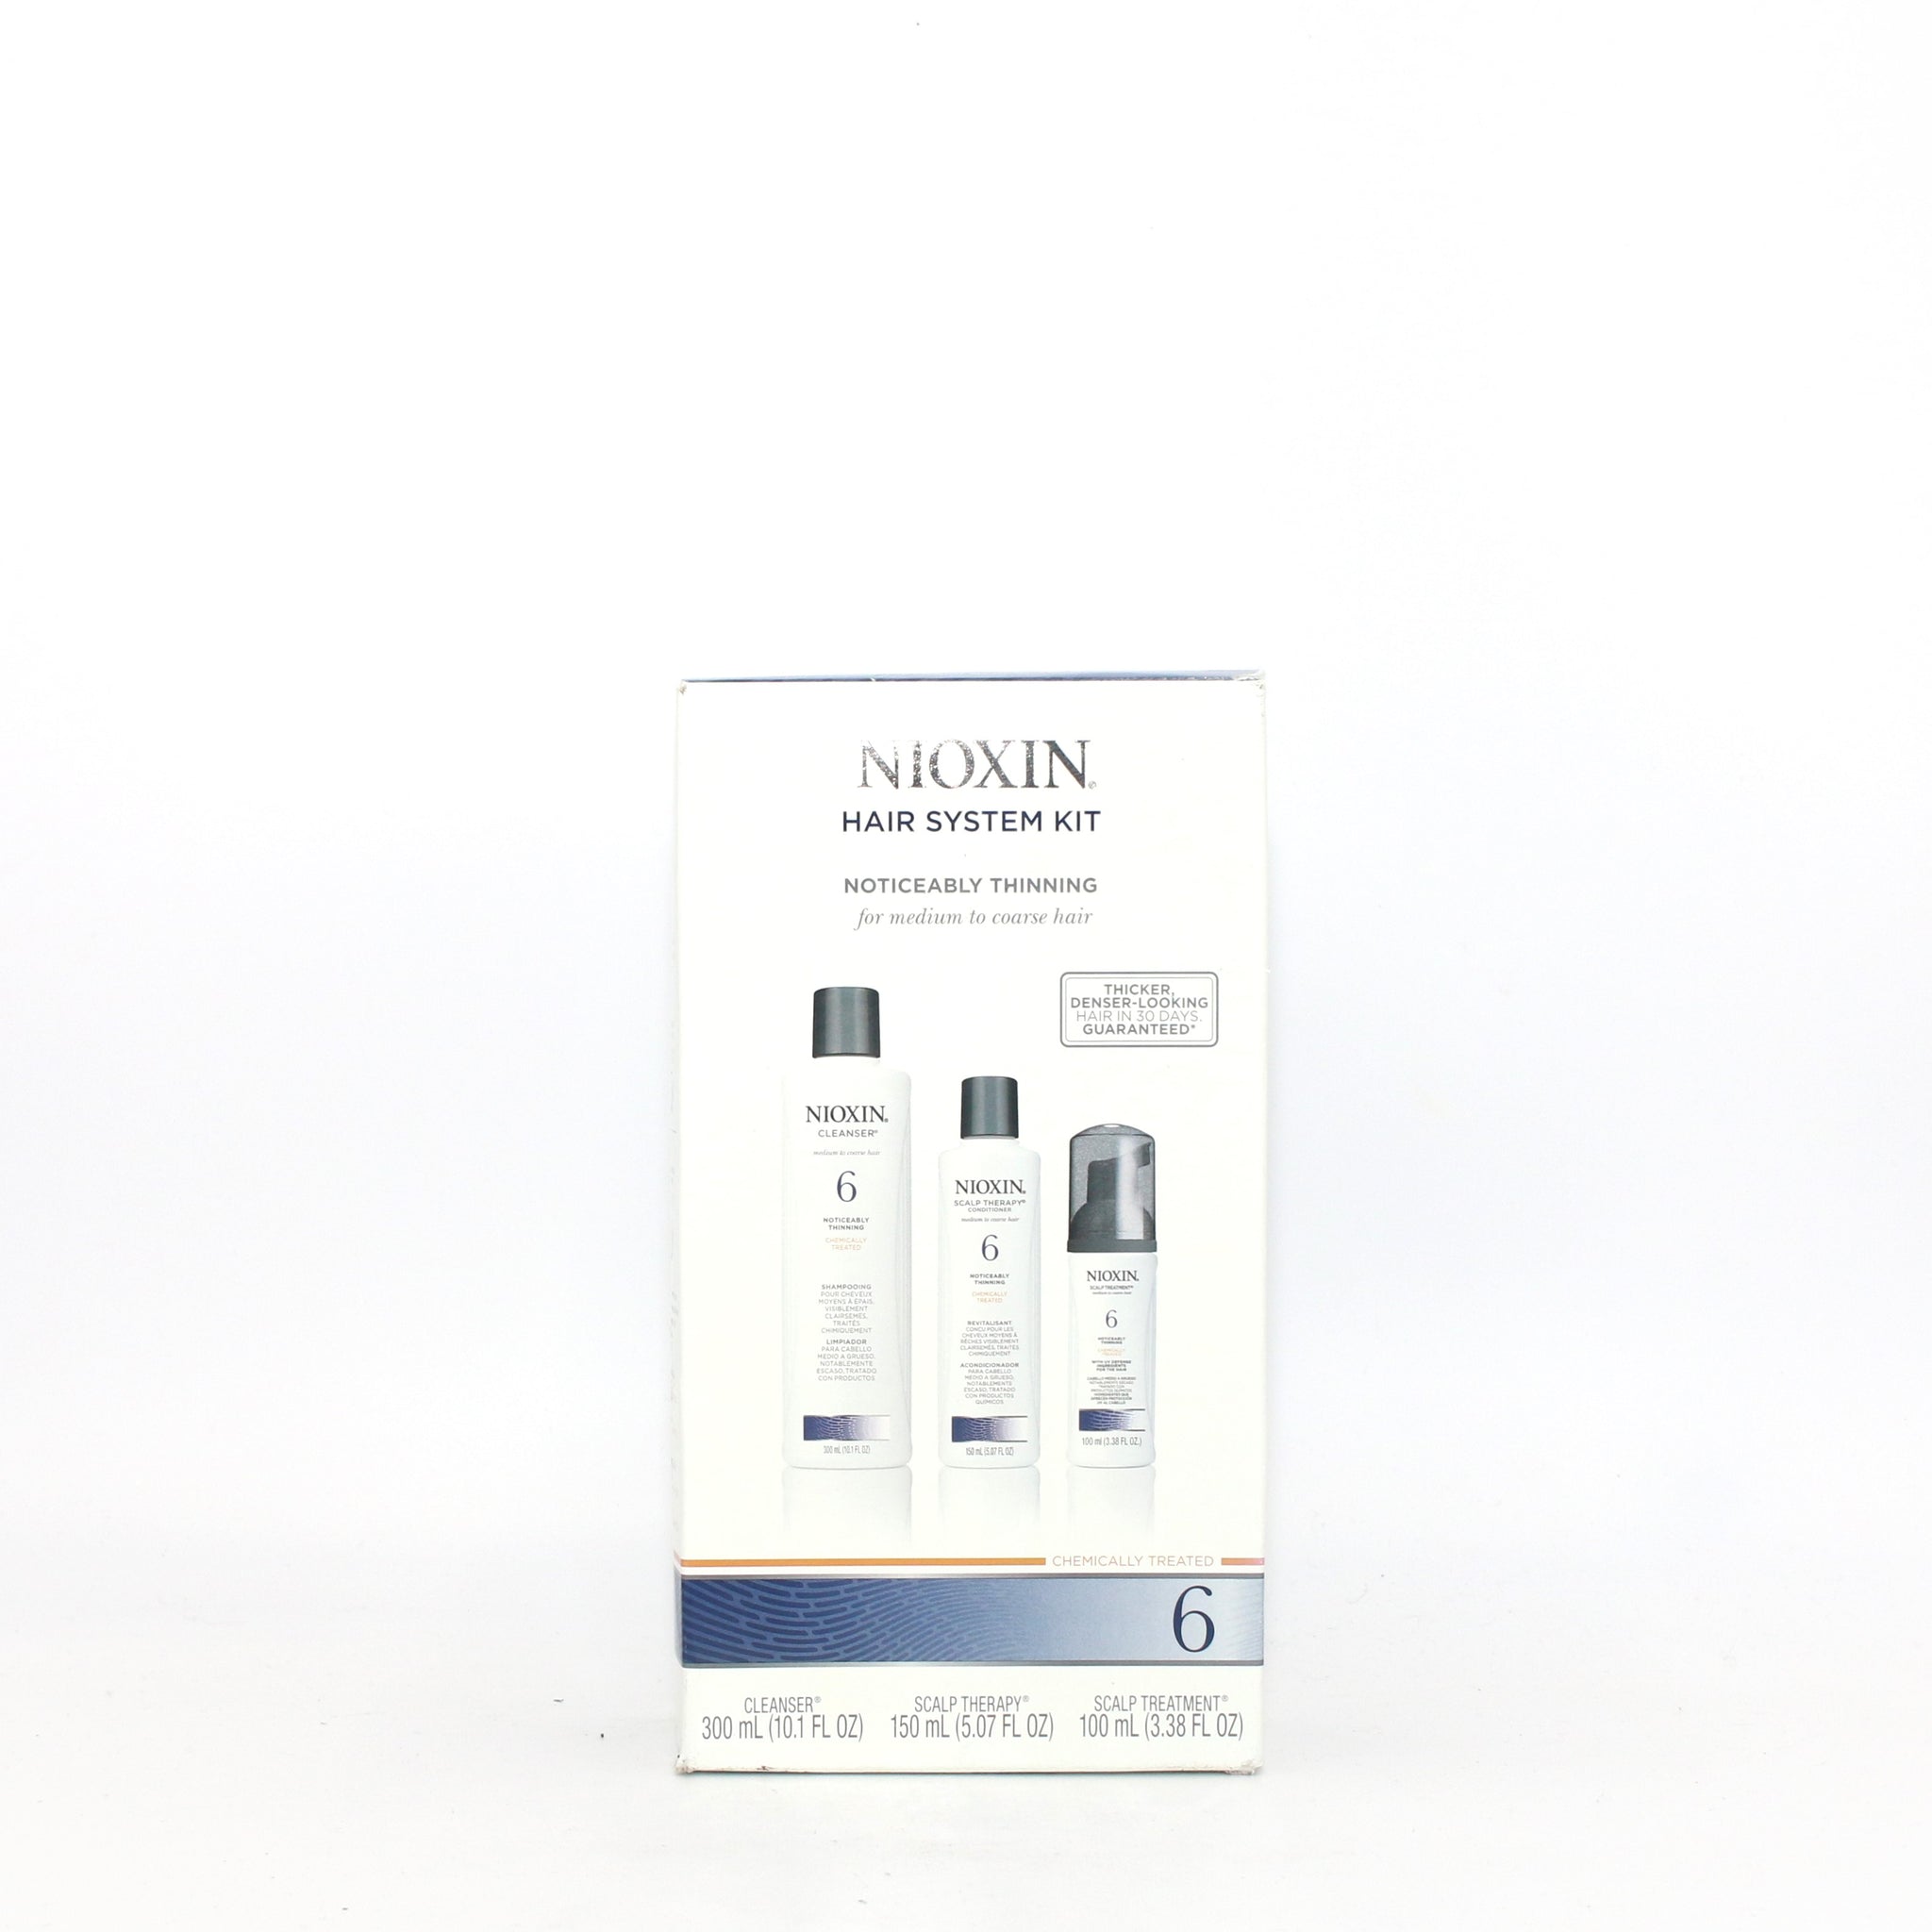 NIOXIN Hair System 6 Kit Noticeable Thinning for Medium to Coarse Hair